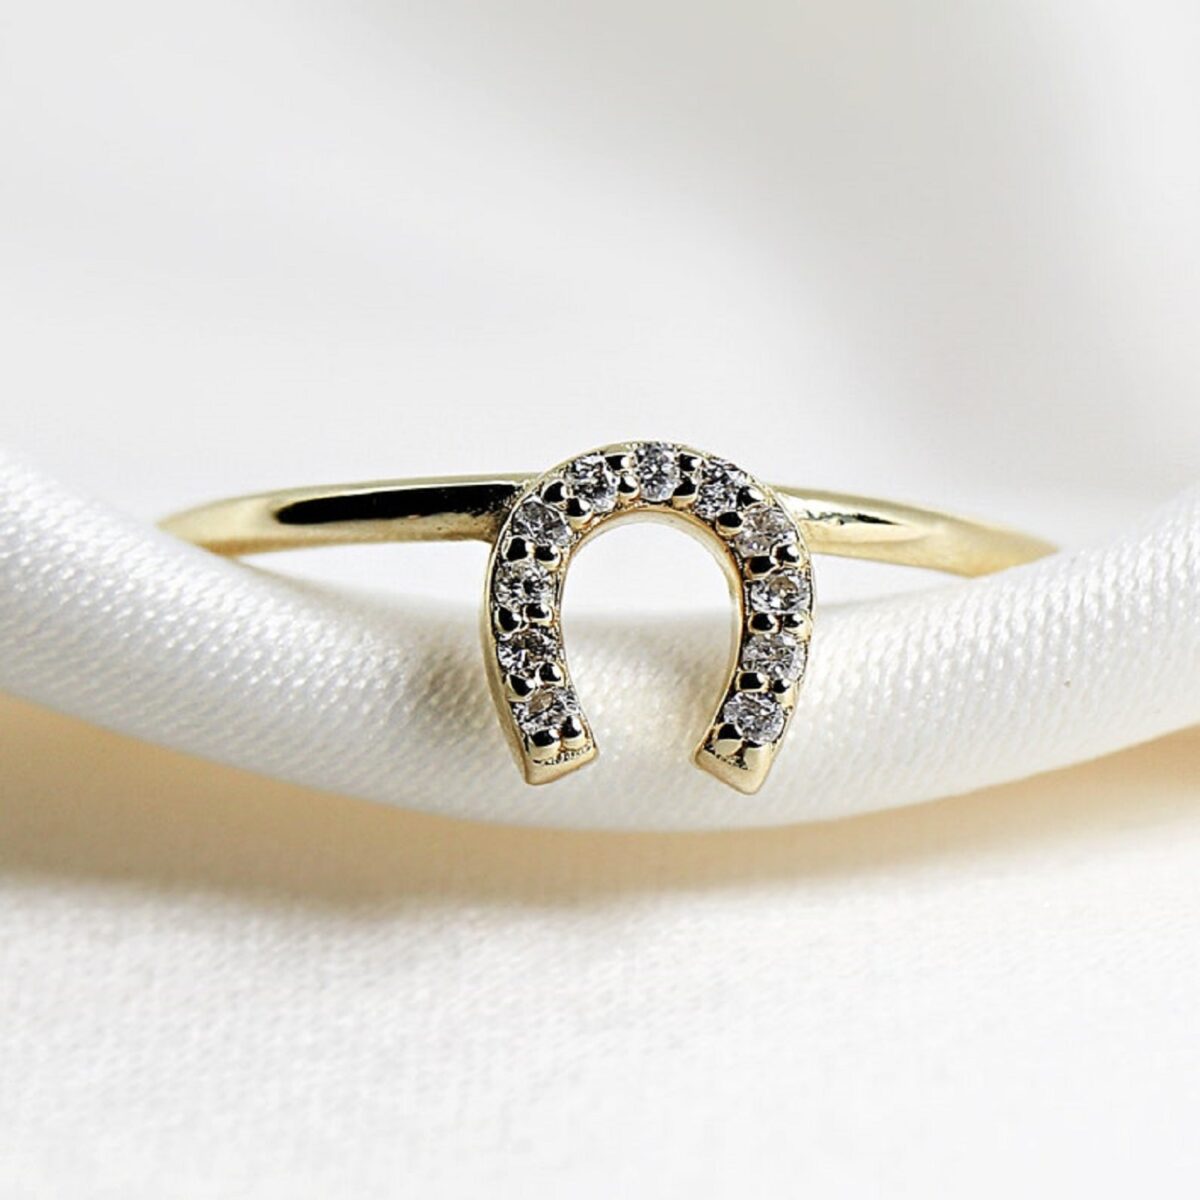 U Ring that has round cut lab grown diamond dainty stackable ring crafted in 14k yellow gold.